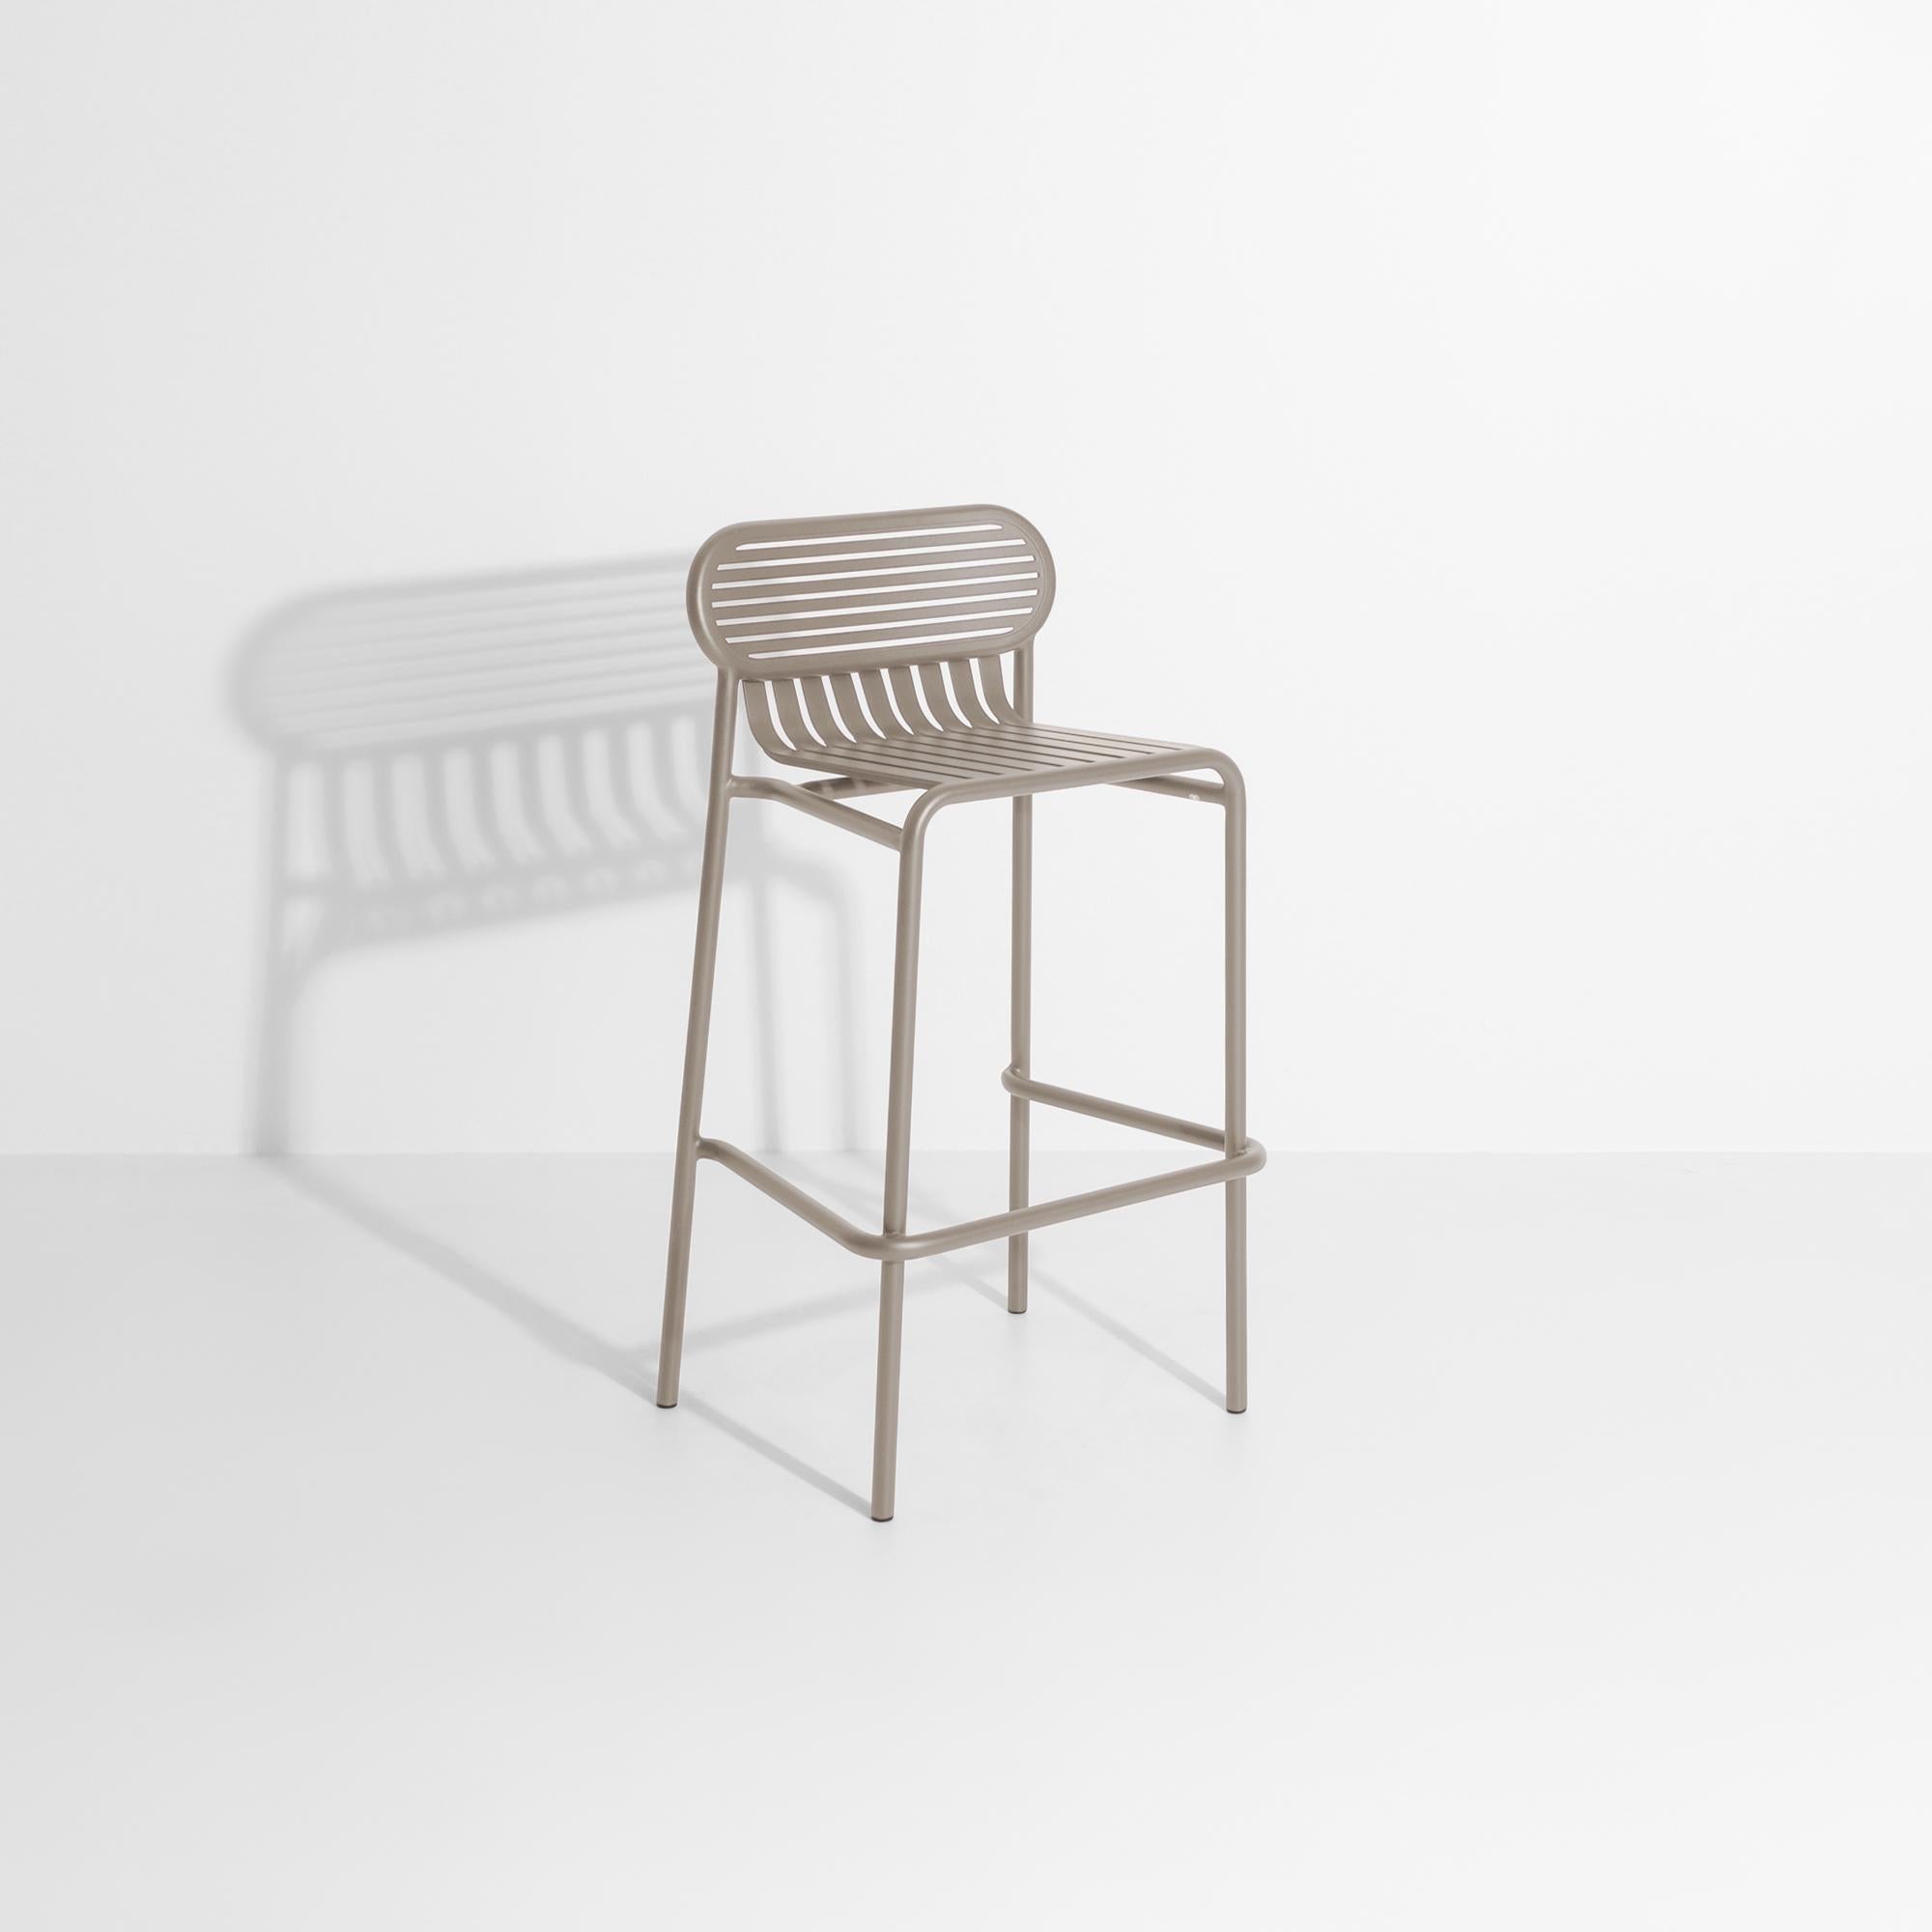 Petite Friture Week-End Bar Stool in Dune Aluminium by Studio BrichetZiegler In New Condition For Sale In Brooklyn, NY